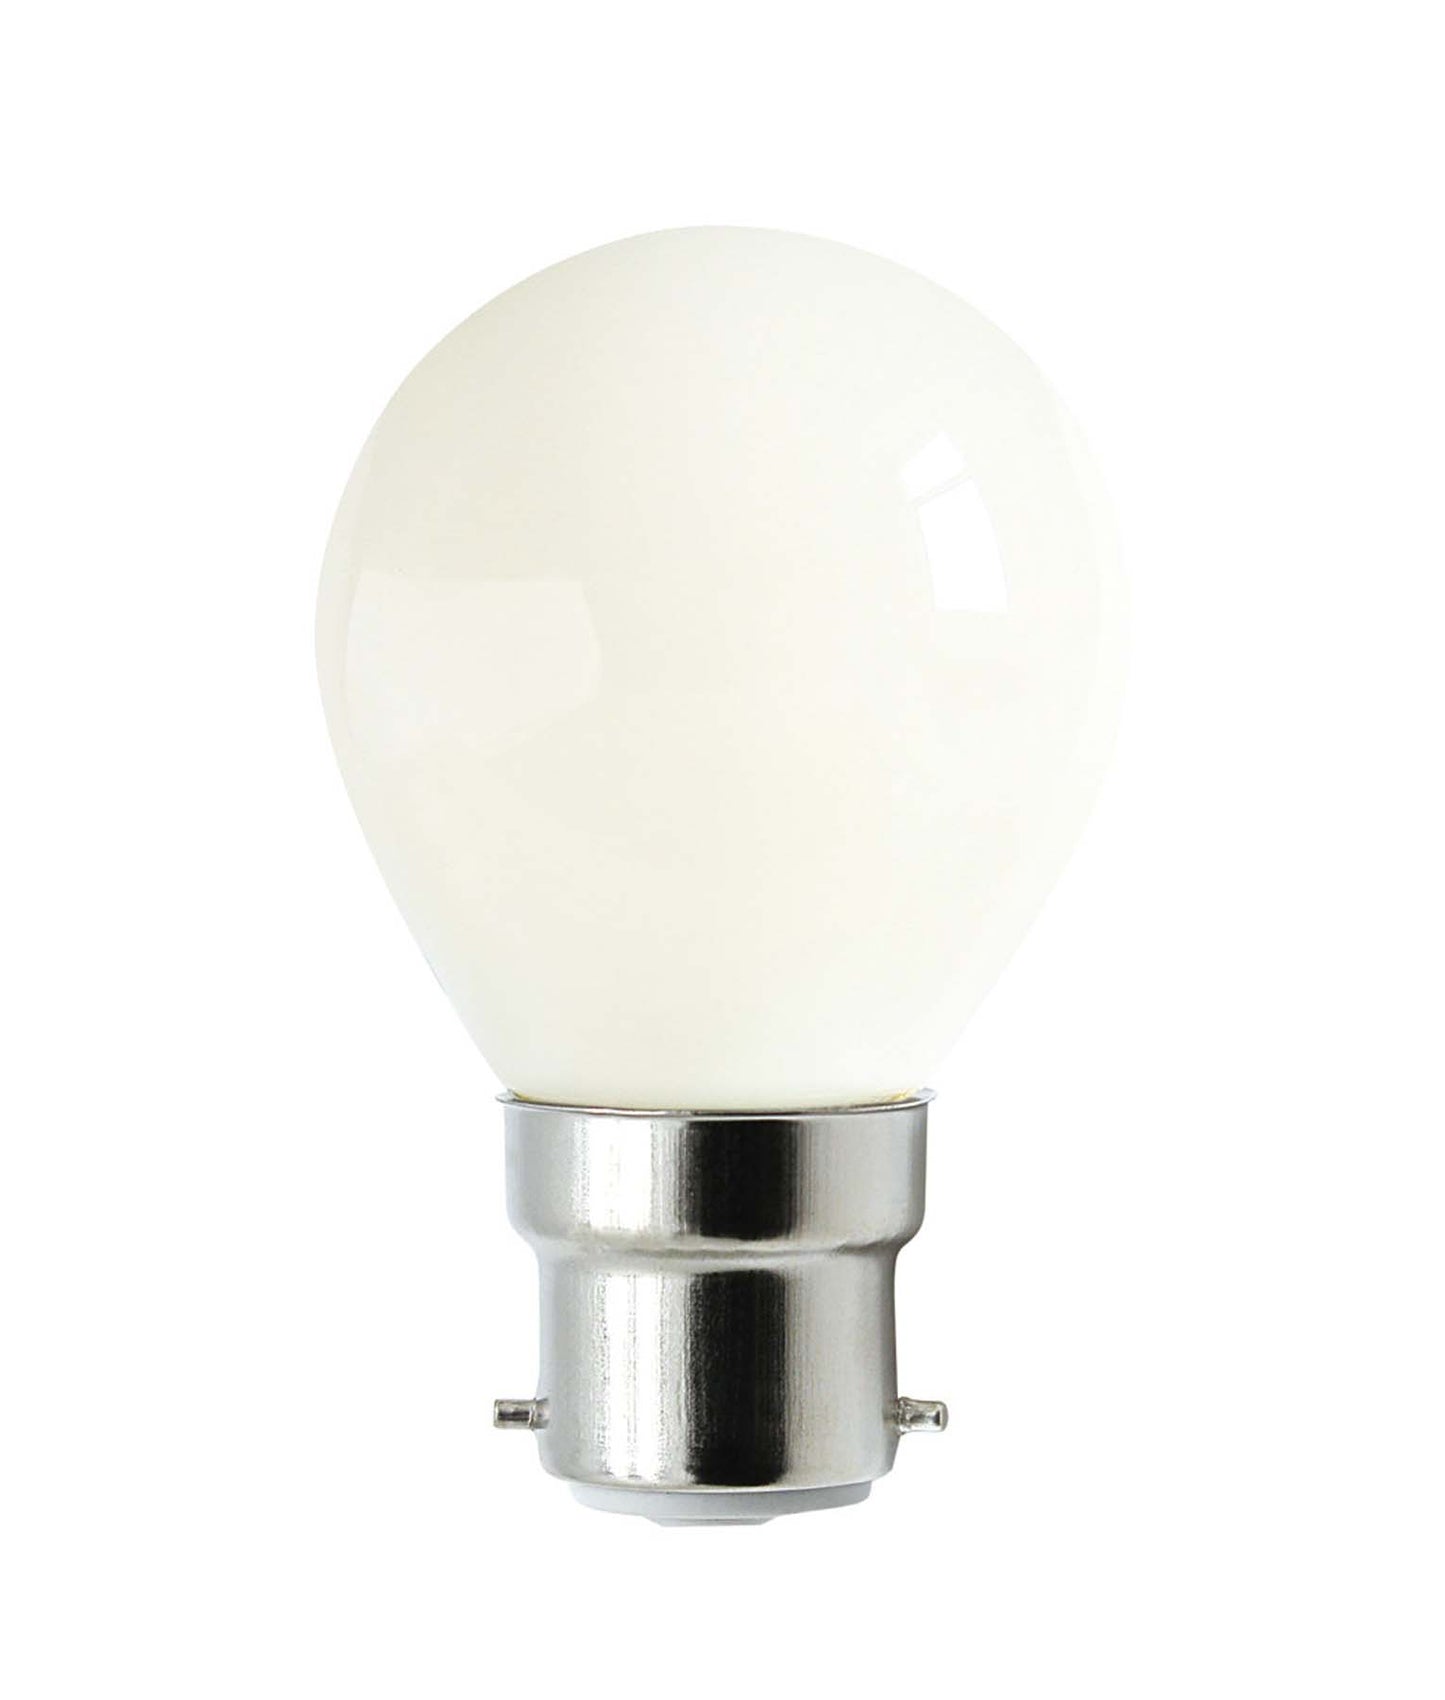 Fancy Round LED Filament Dimmable Frosted Globes (4W)